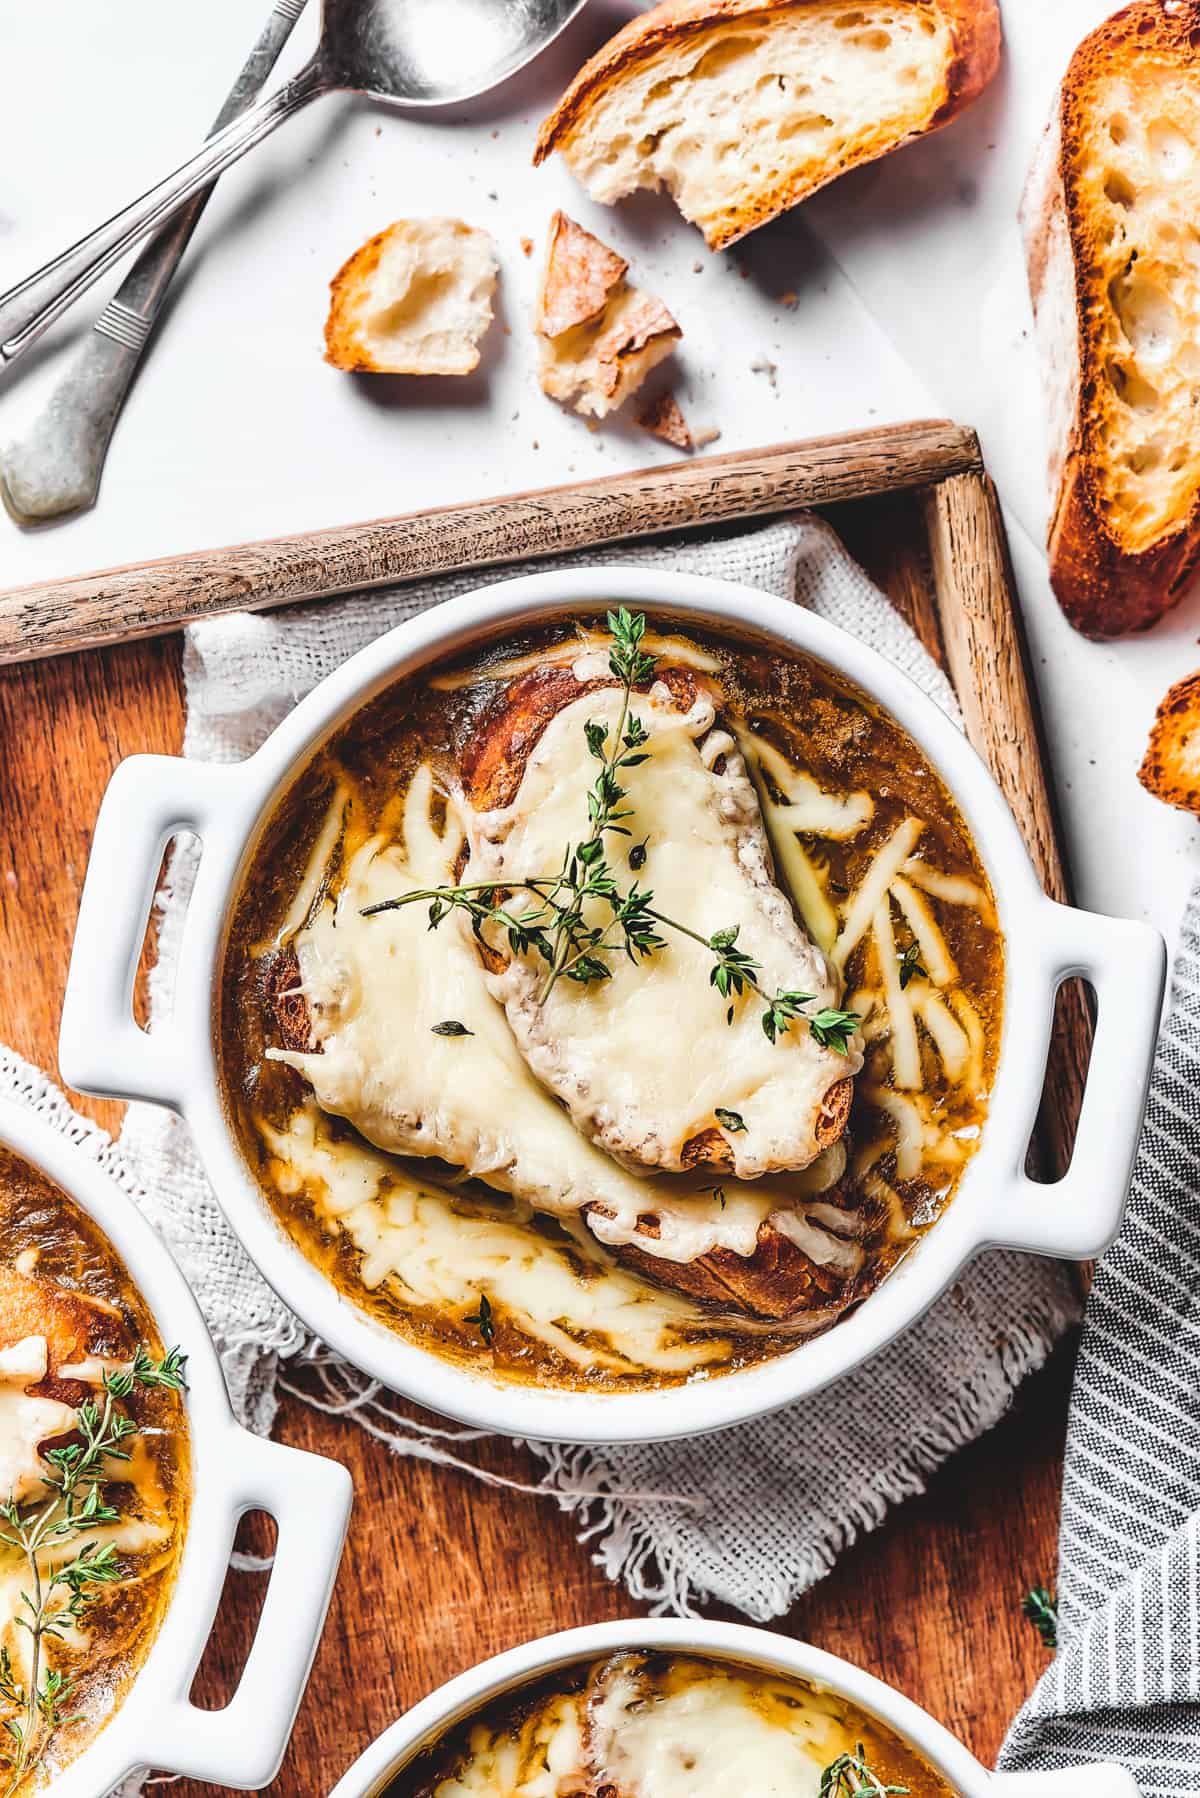 Double-handled bowls of French onion soup on a tray.